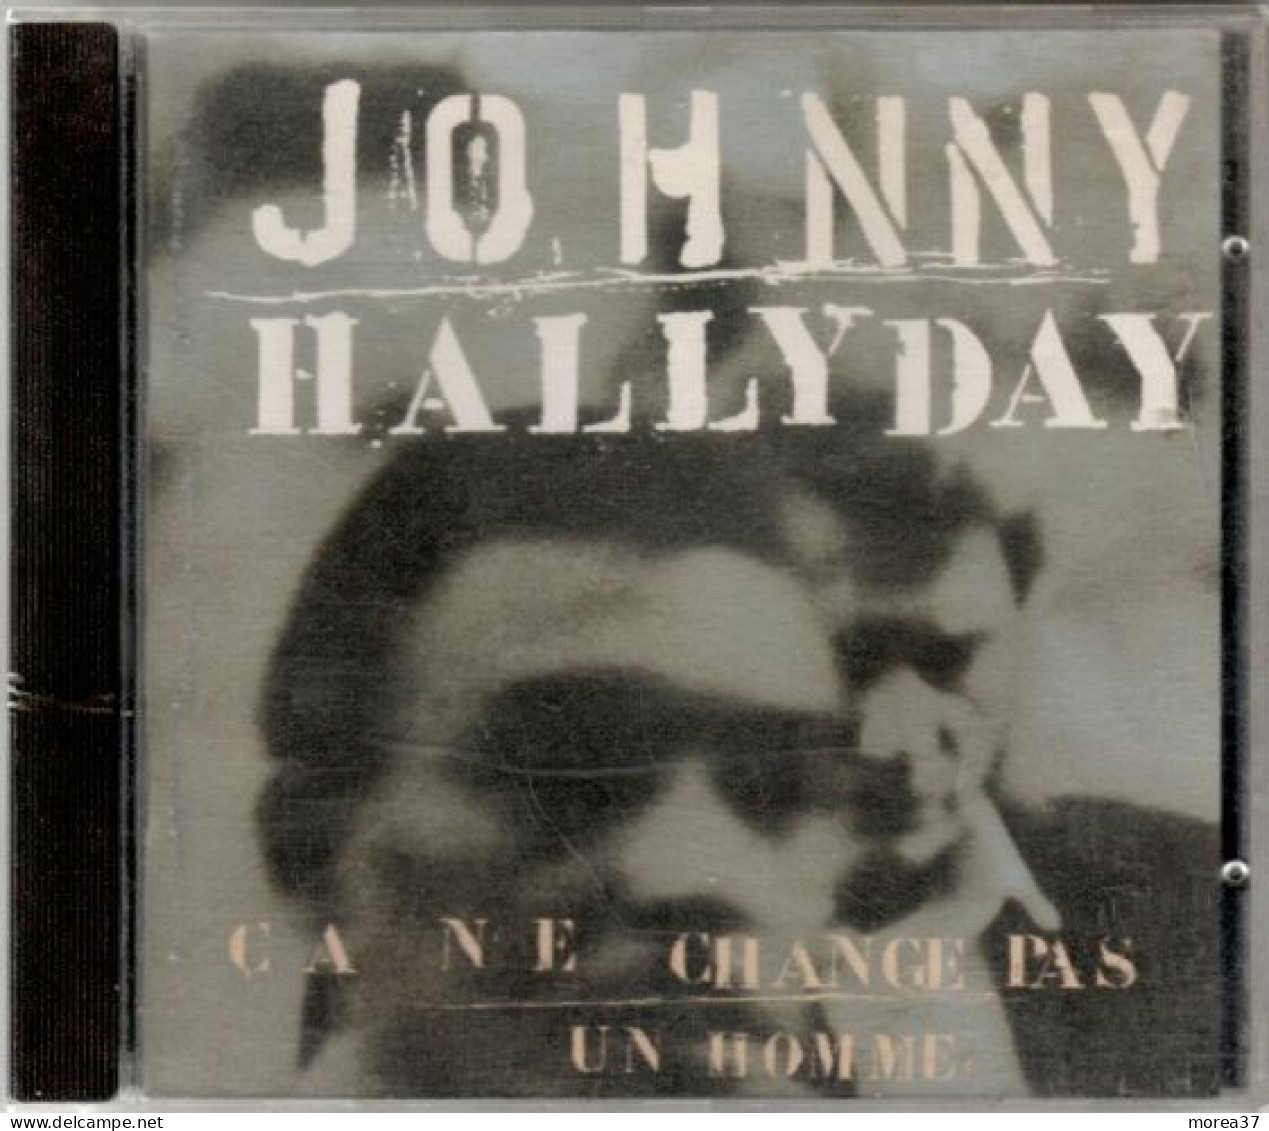 JOHNNY HALLYDAY   Ca Ne Change Pas Un Homme   ( Ref CD2) - Other - French Music